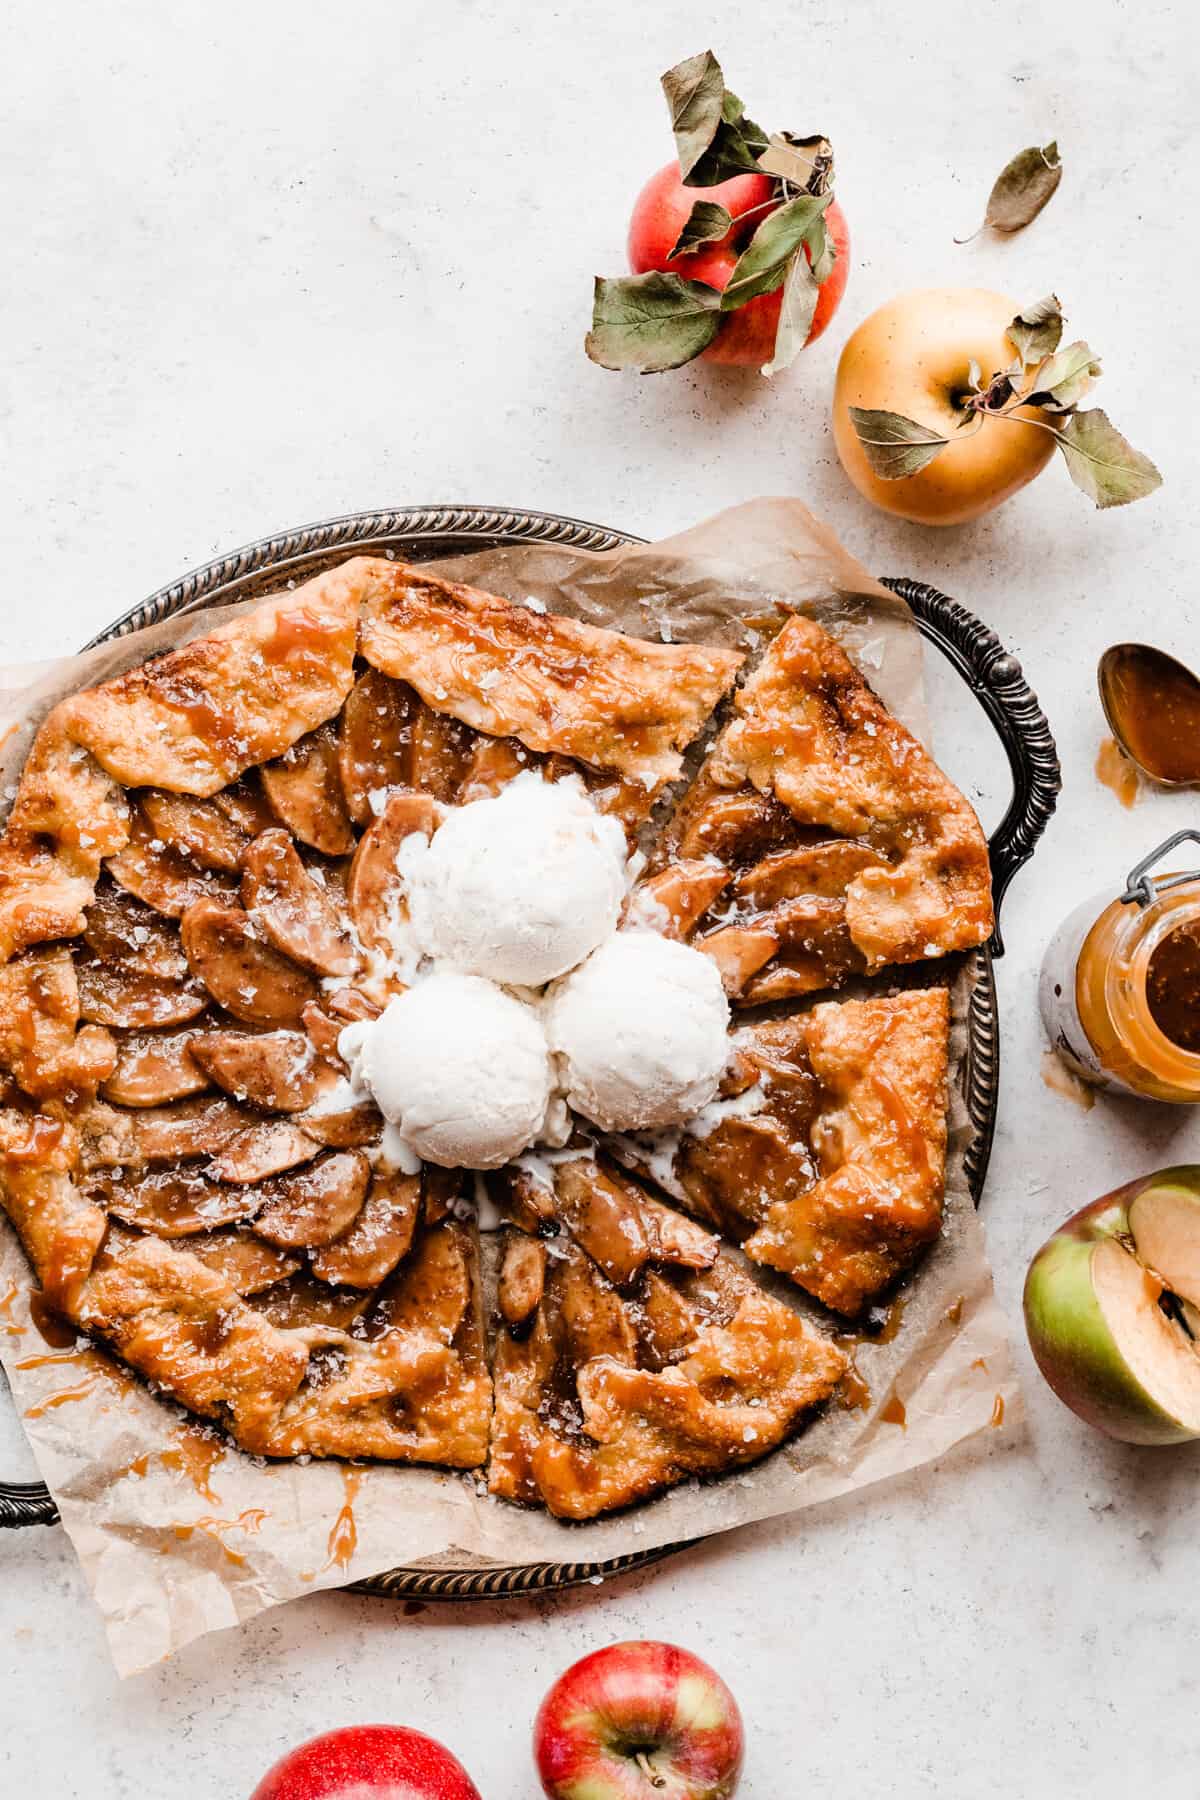 Apple galette on a vintage tray, drizzled with caramel sauce.